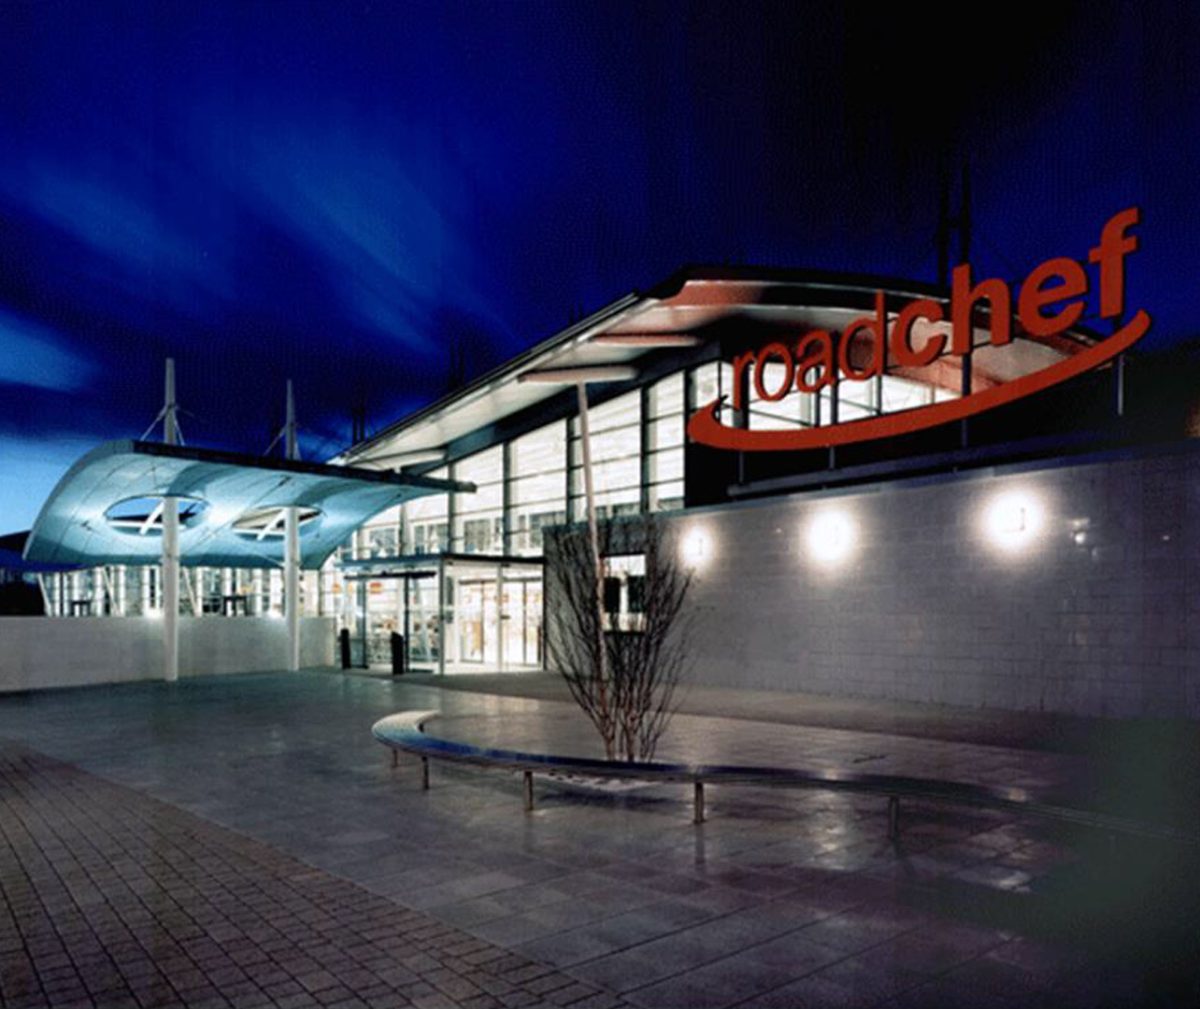 A Roadchef motorway station at night. The building's bright lights forms a stark contrast with the dark sky.